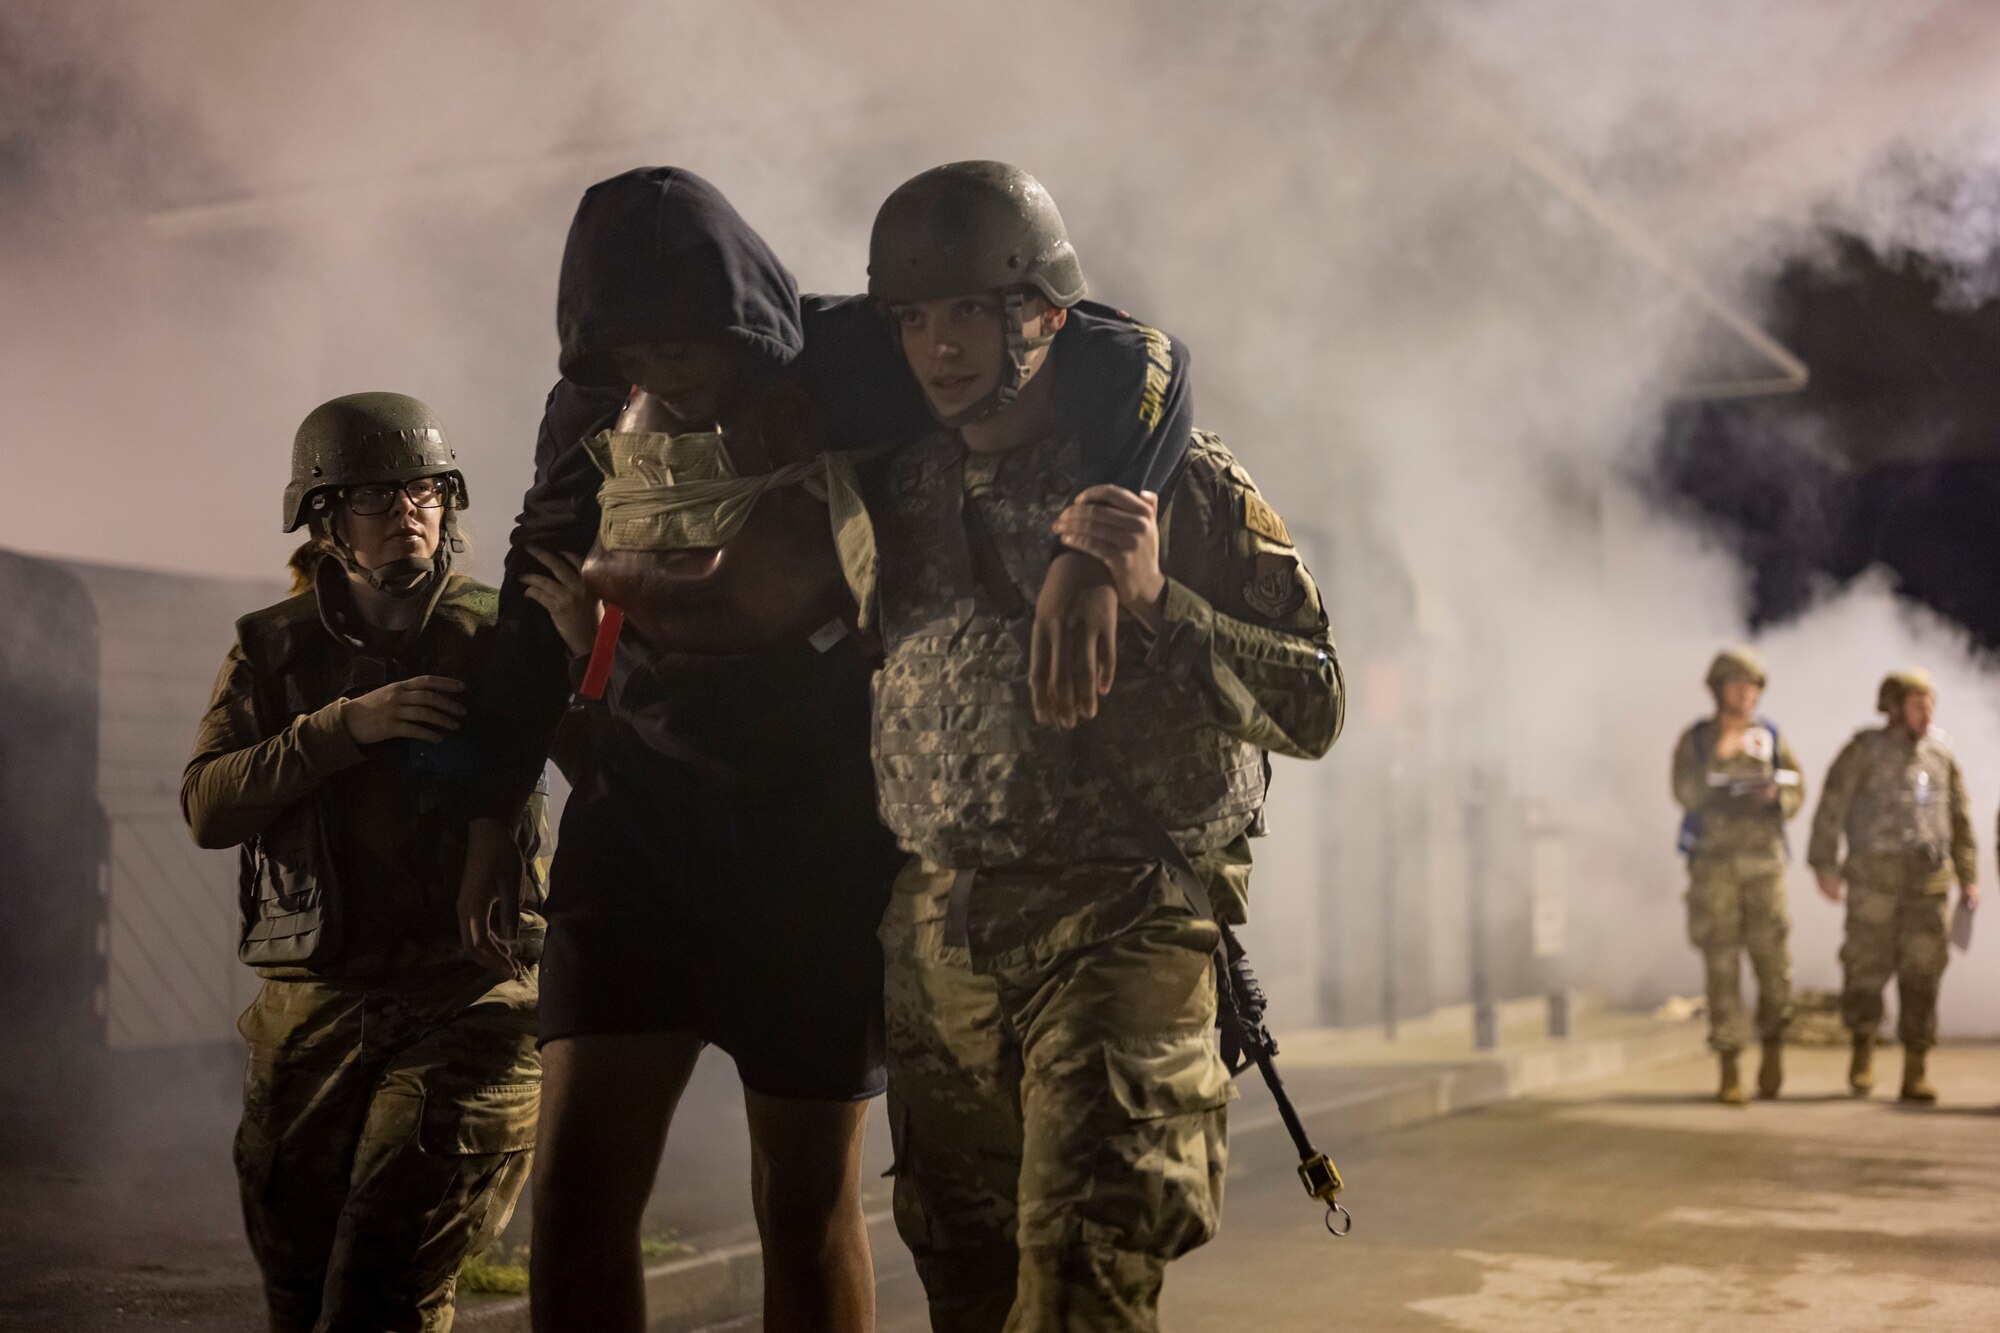 U.S. Air Force members carry a simulated victim with smoke in the background.